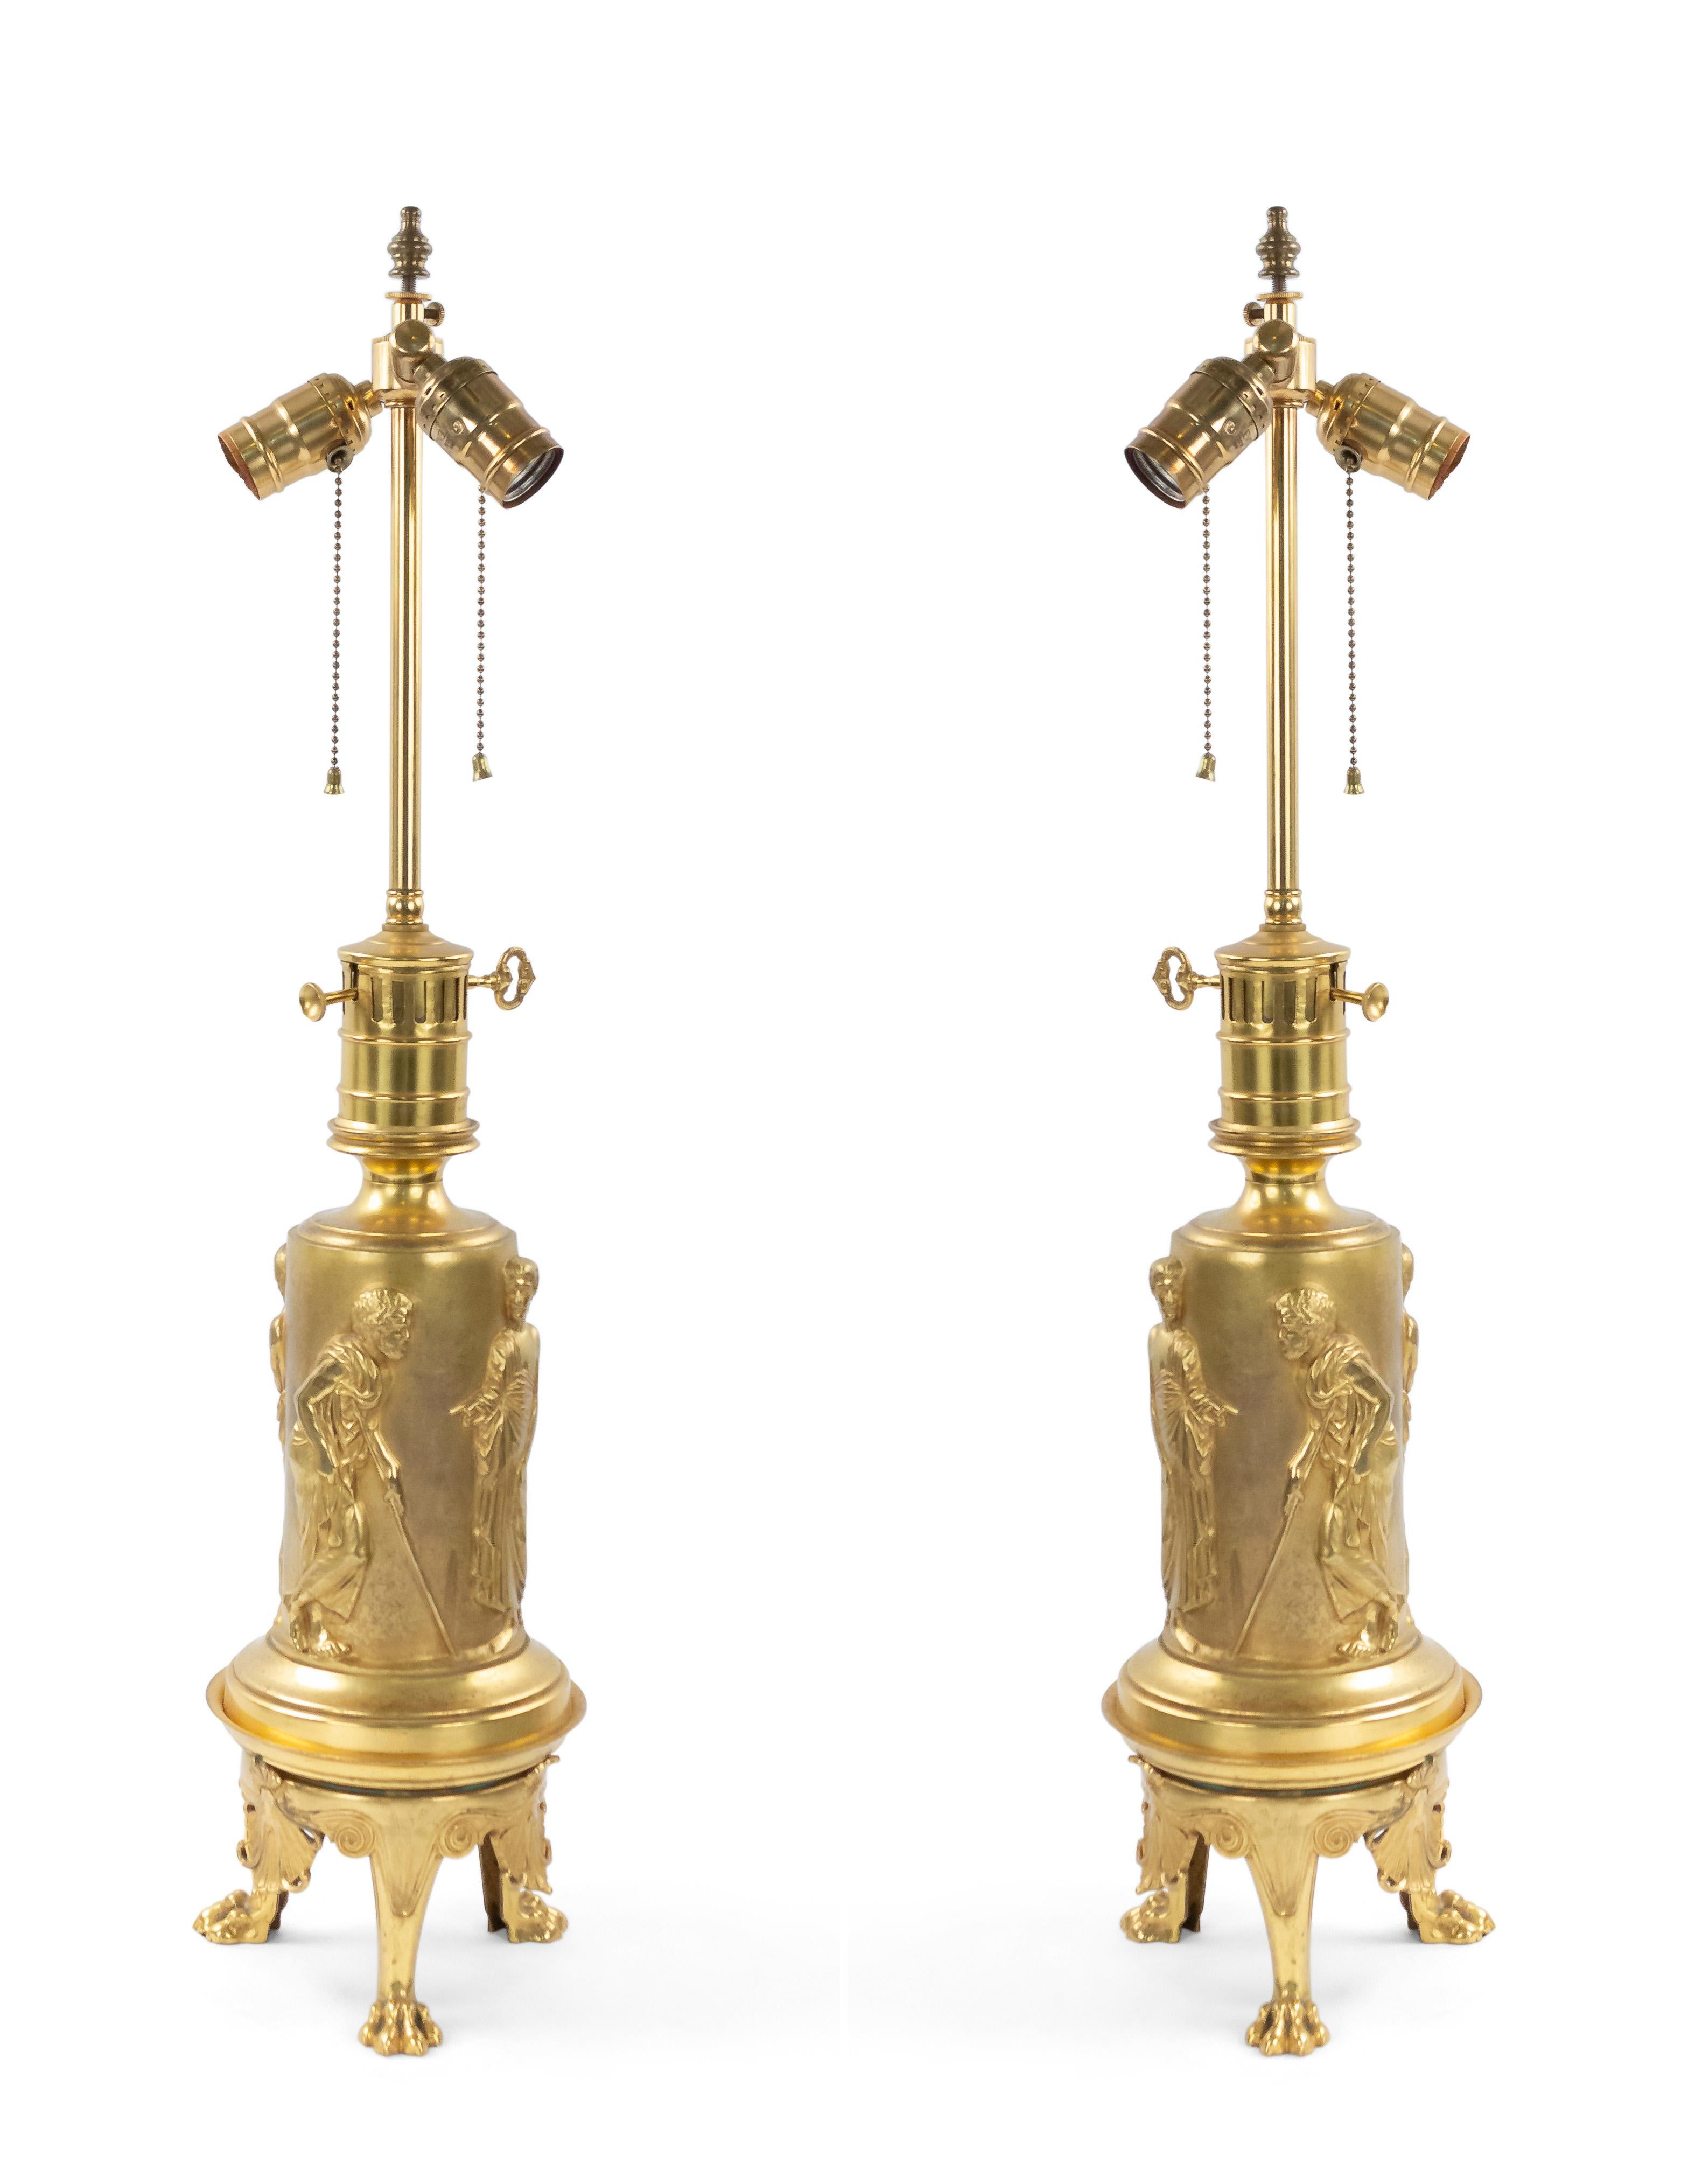 Pair of English Regency-style (19th Century) bronze dore table lamps, originally for oil, with classic figures in relief on 3 legged base (PRICED AS Pair).
